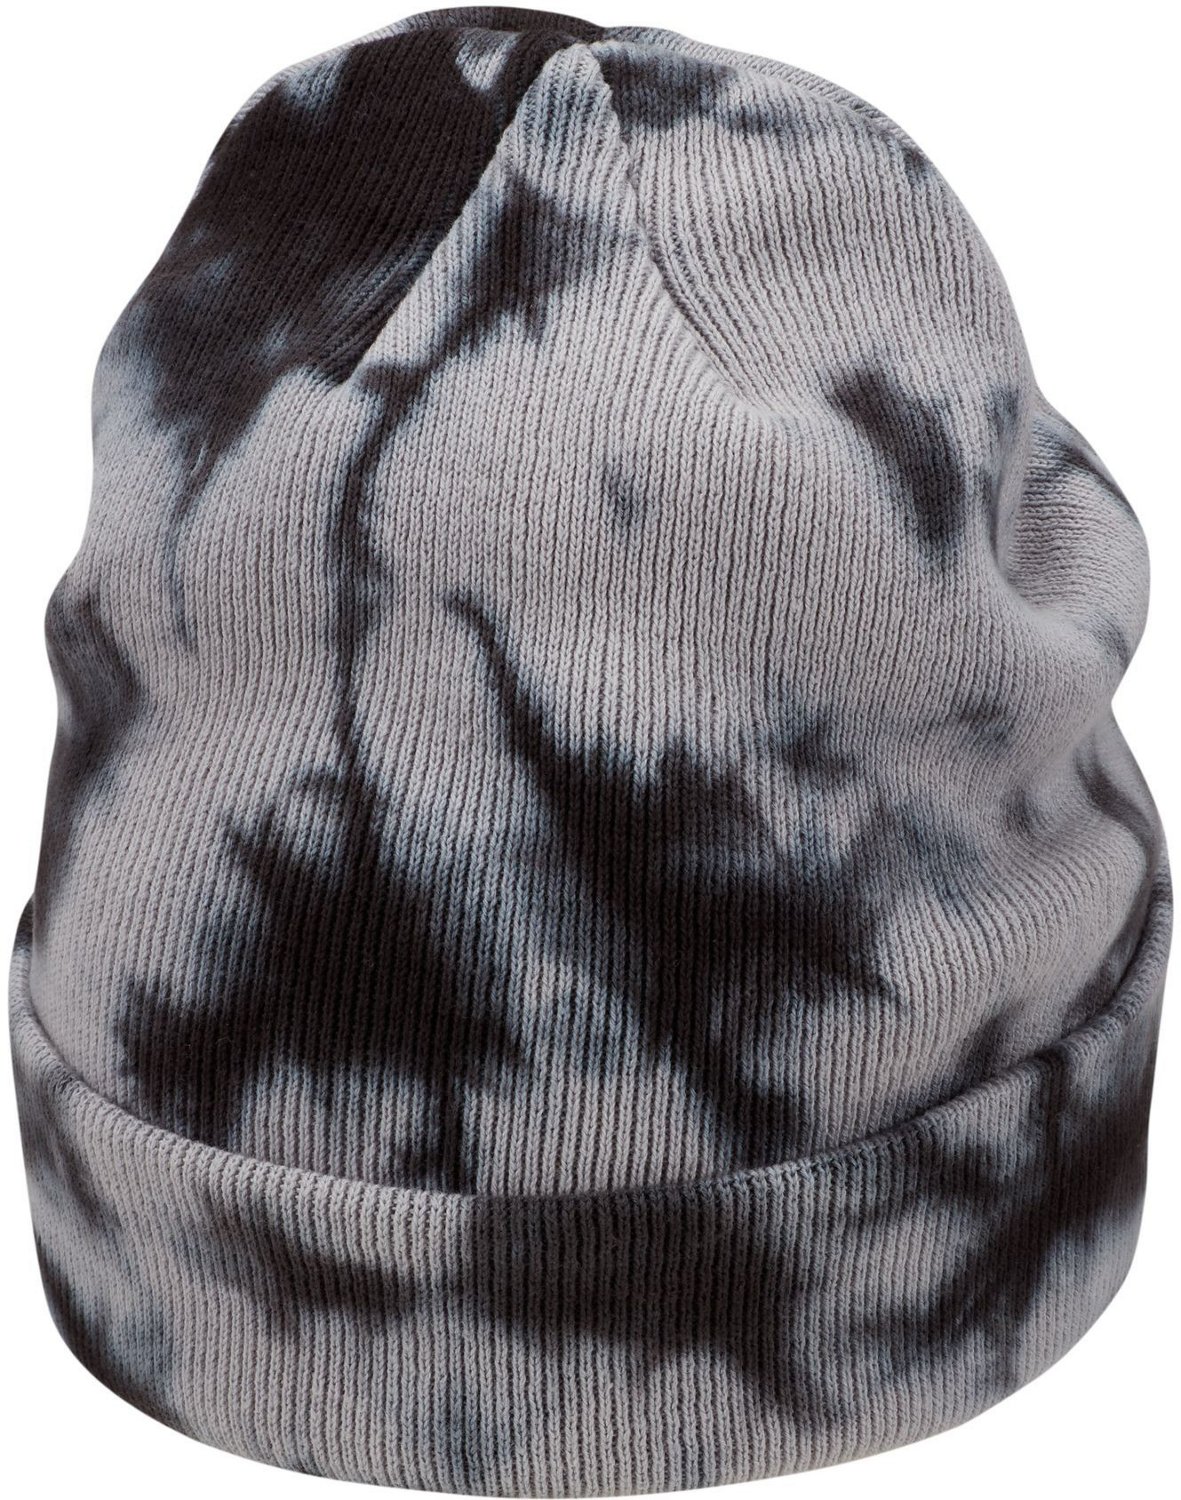 | Tie-Dye Beanie Terra Academy Nike Shipping Free at Adults\'